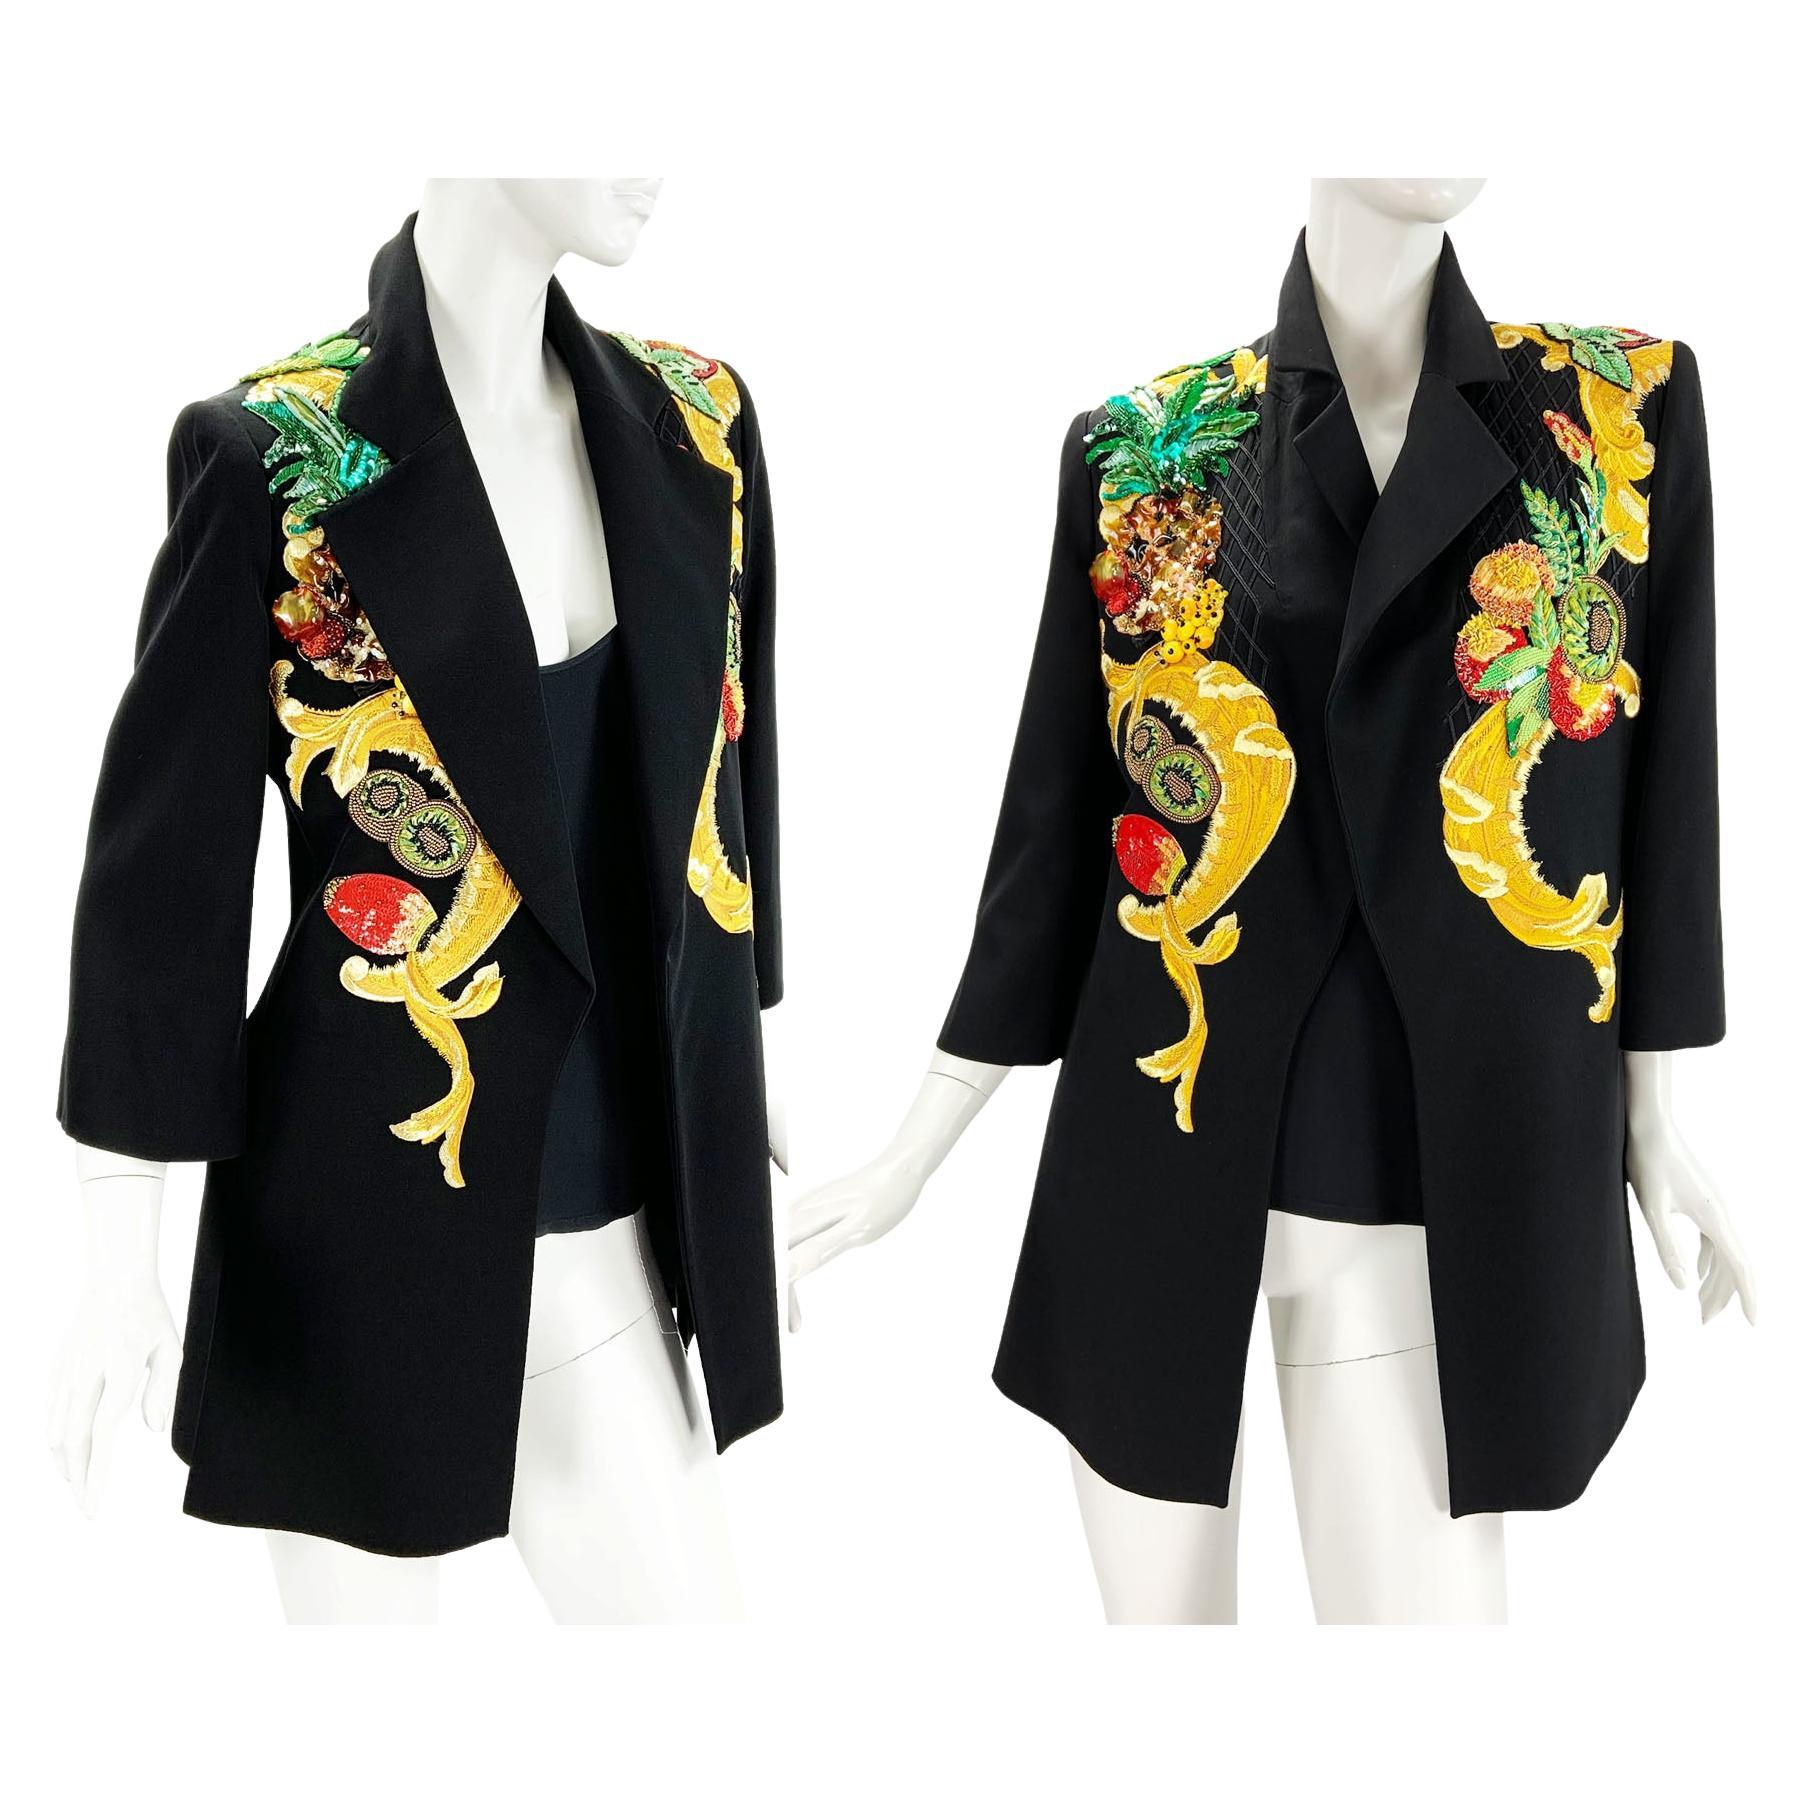  Christian Dior 1980's Numbered Beaded & Embroidered Long Blazer Jacket + Top  For Sale